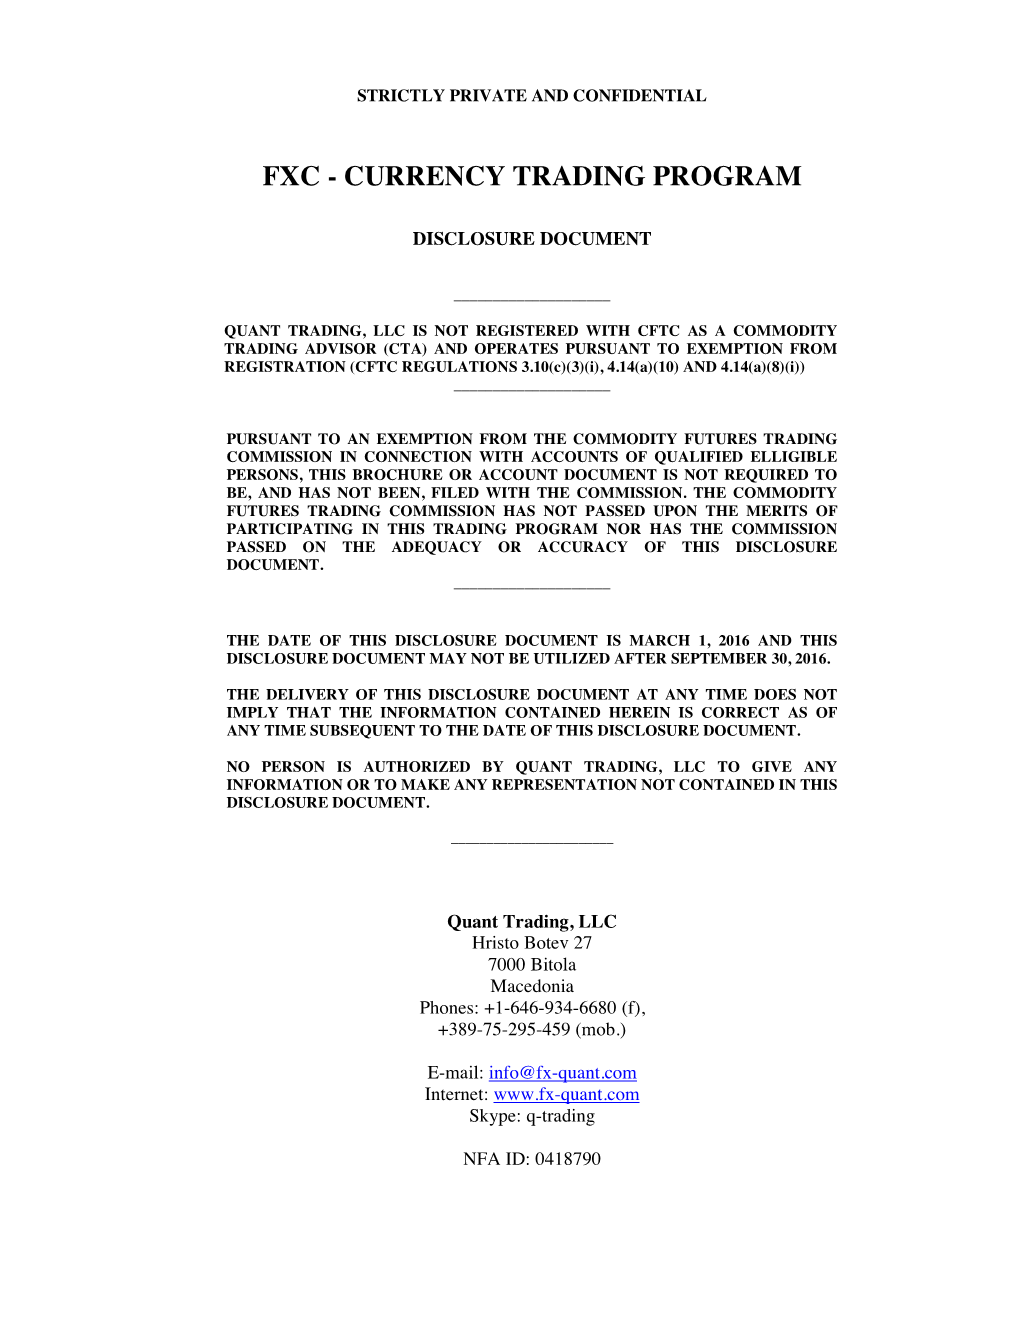 Currency Trading Program